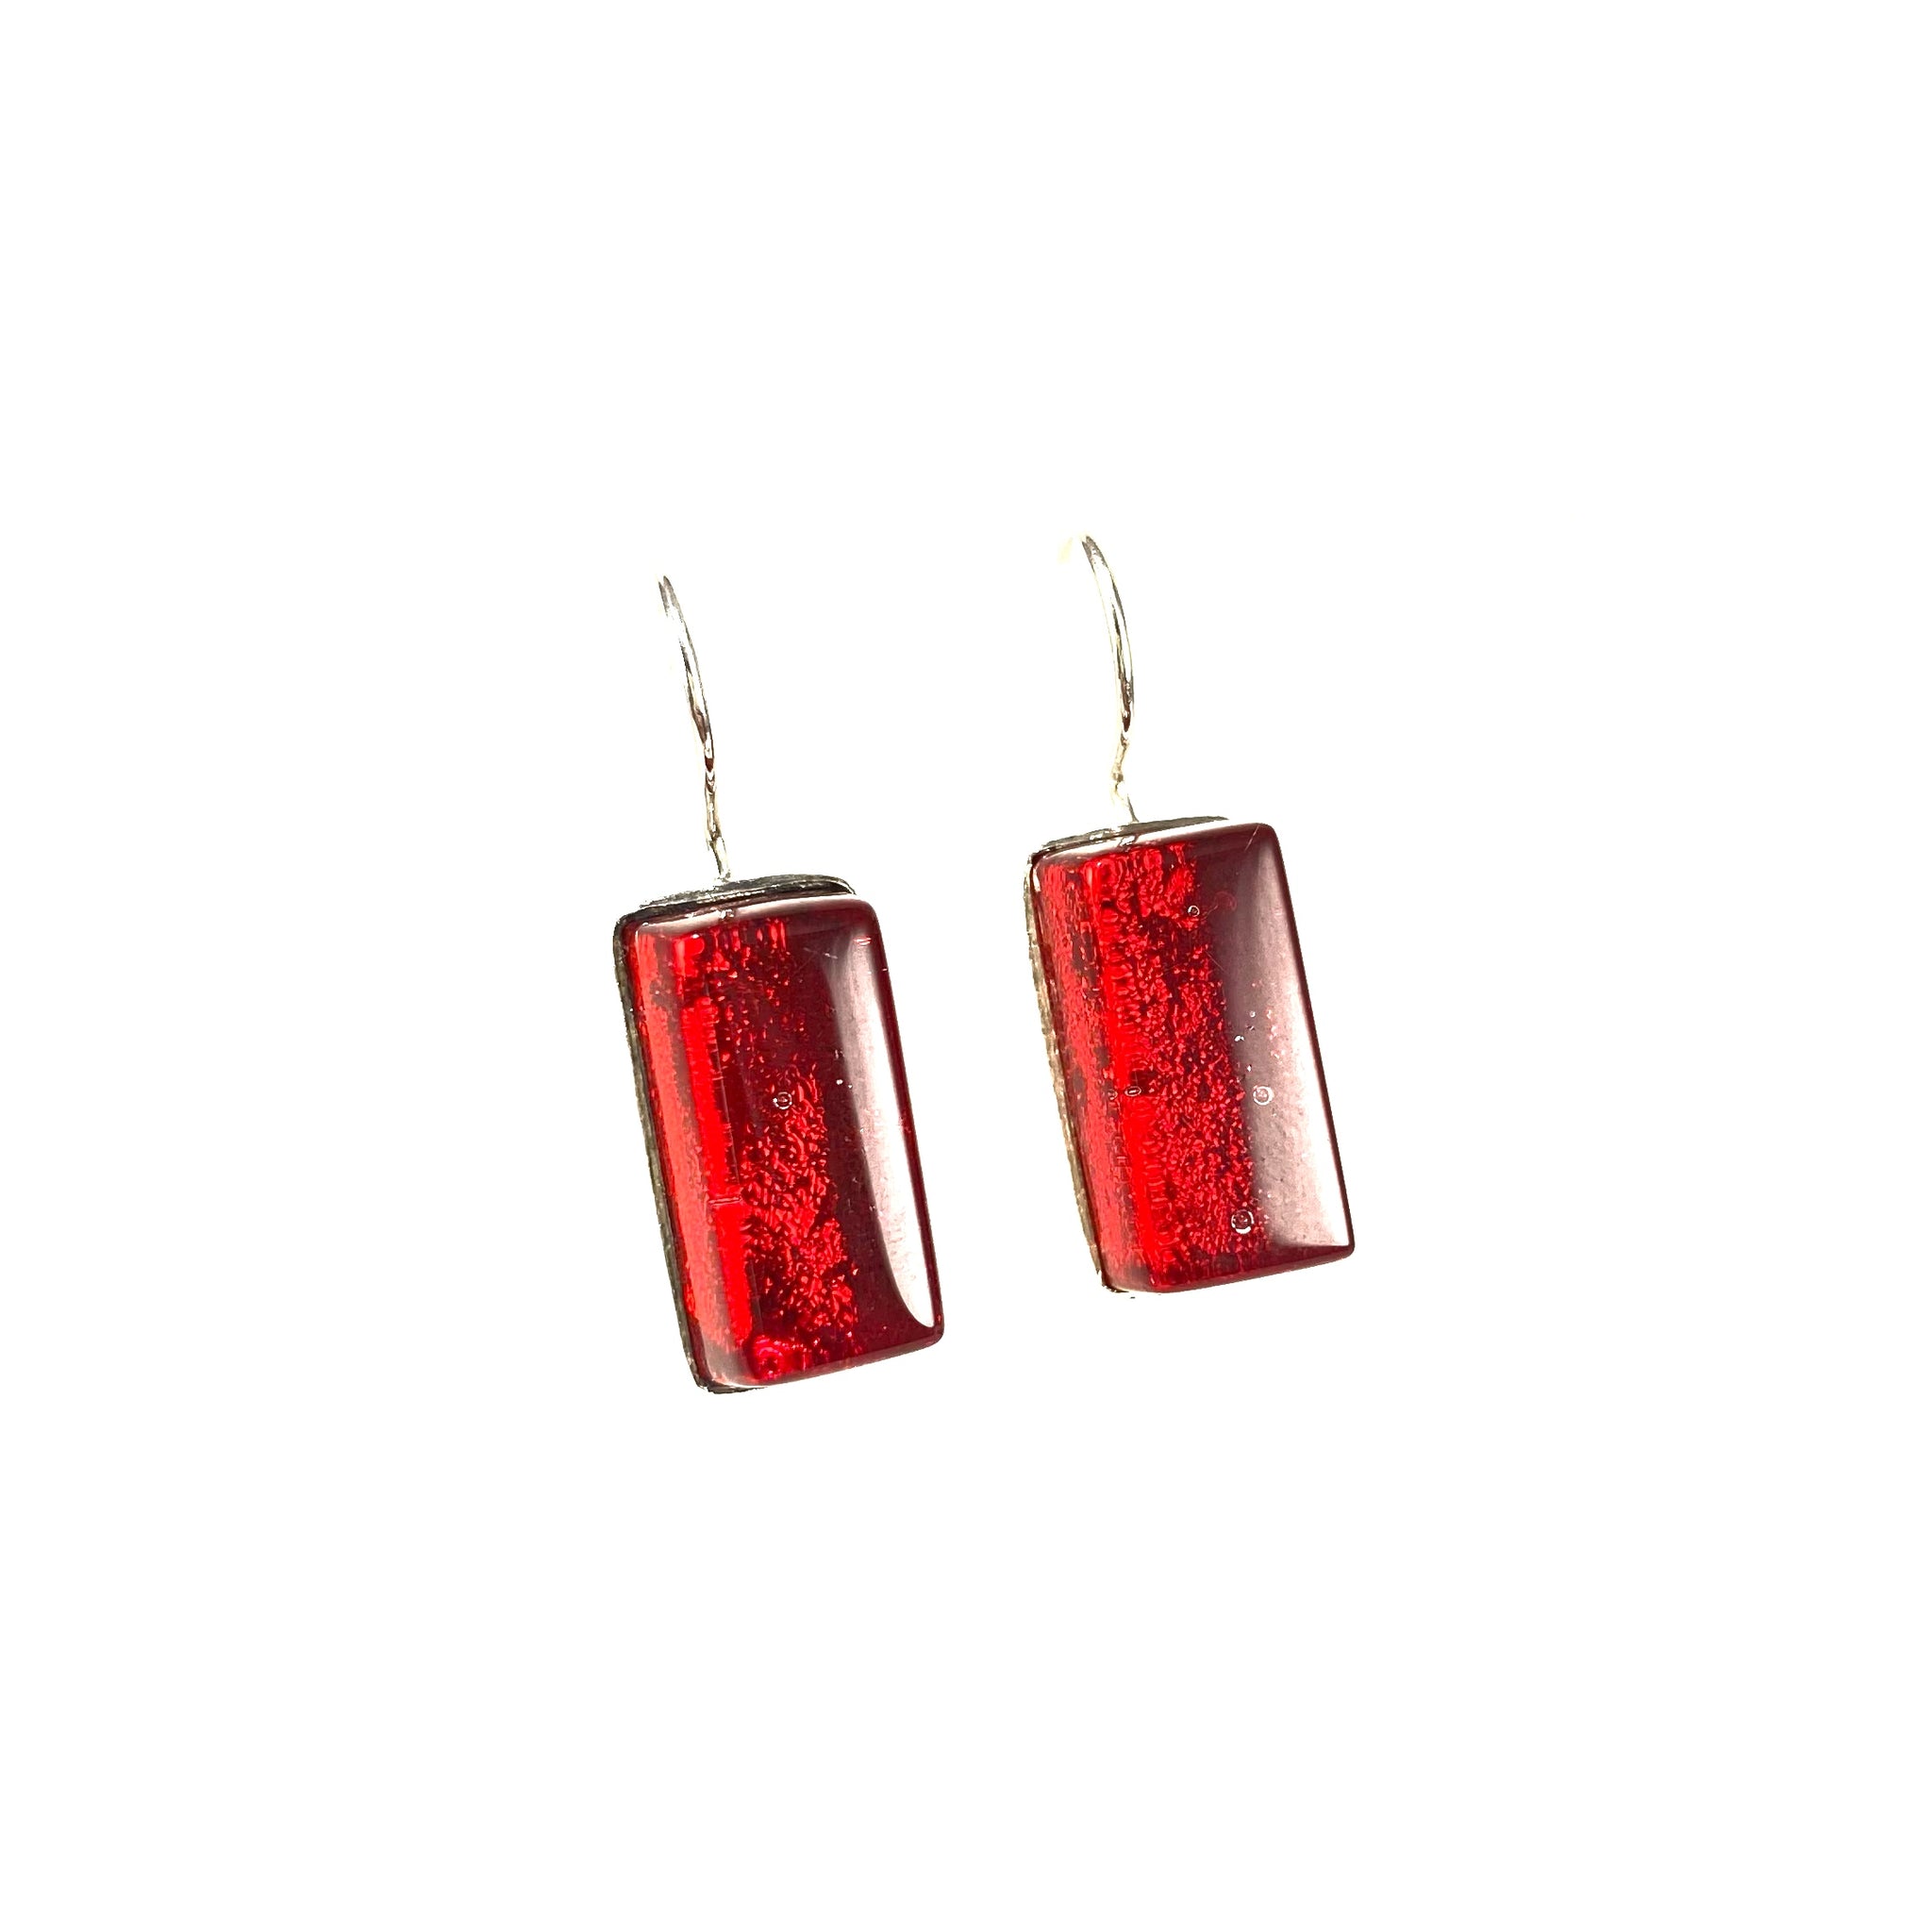 cherry, red, rectangle earrings, fused glass, glass jewelry, glass and silver jewelry, handmade, handcrafted, American Craft, hand fabricated jewelry, hand fabricated jewellery,  Athen, Georgia, colorful jewelry, sparkle, bullseye glass, dichroic glass